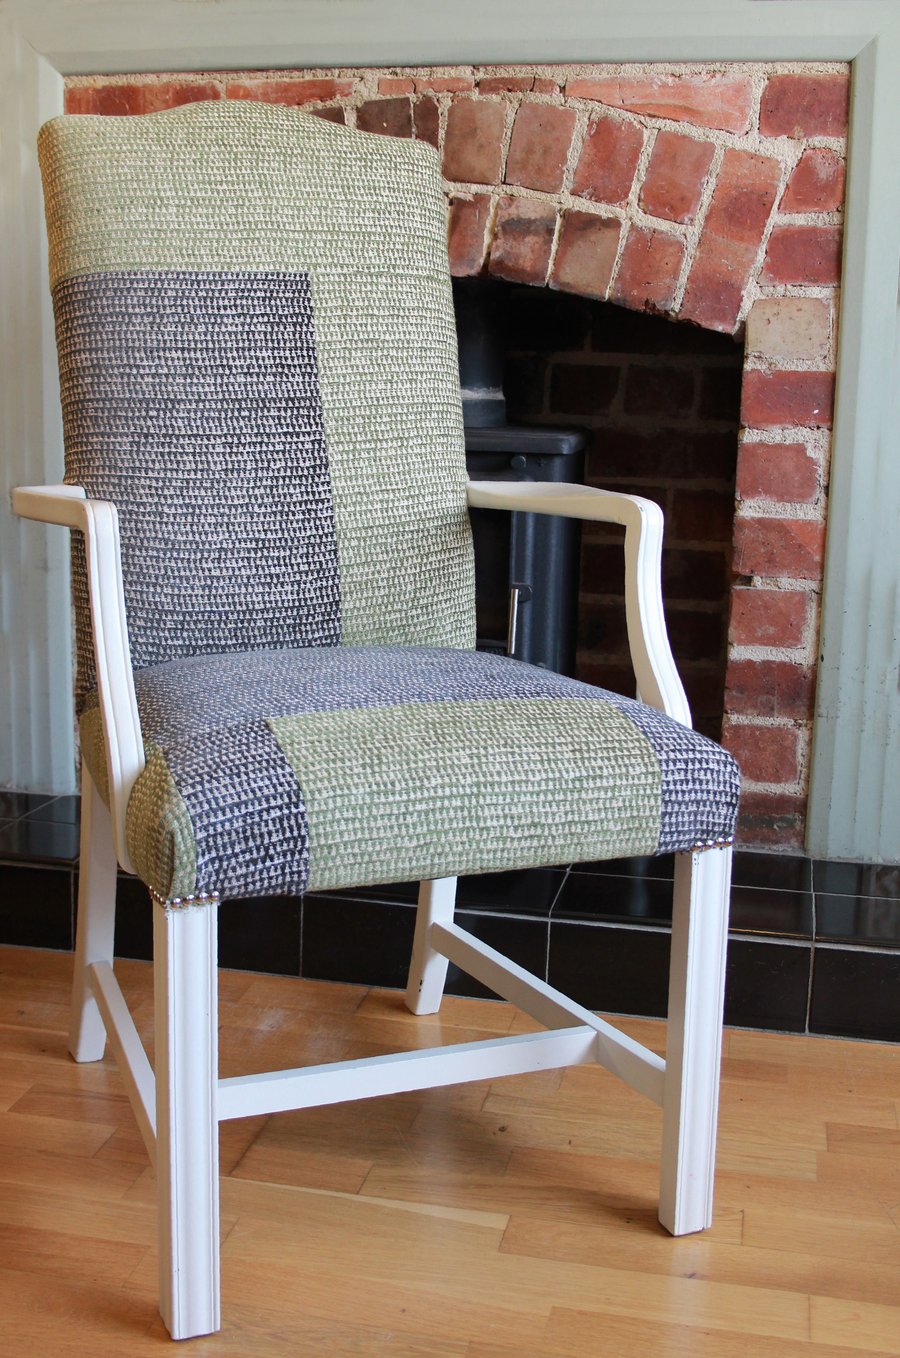 SALE! Patchwork Chair Green & Brown